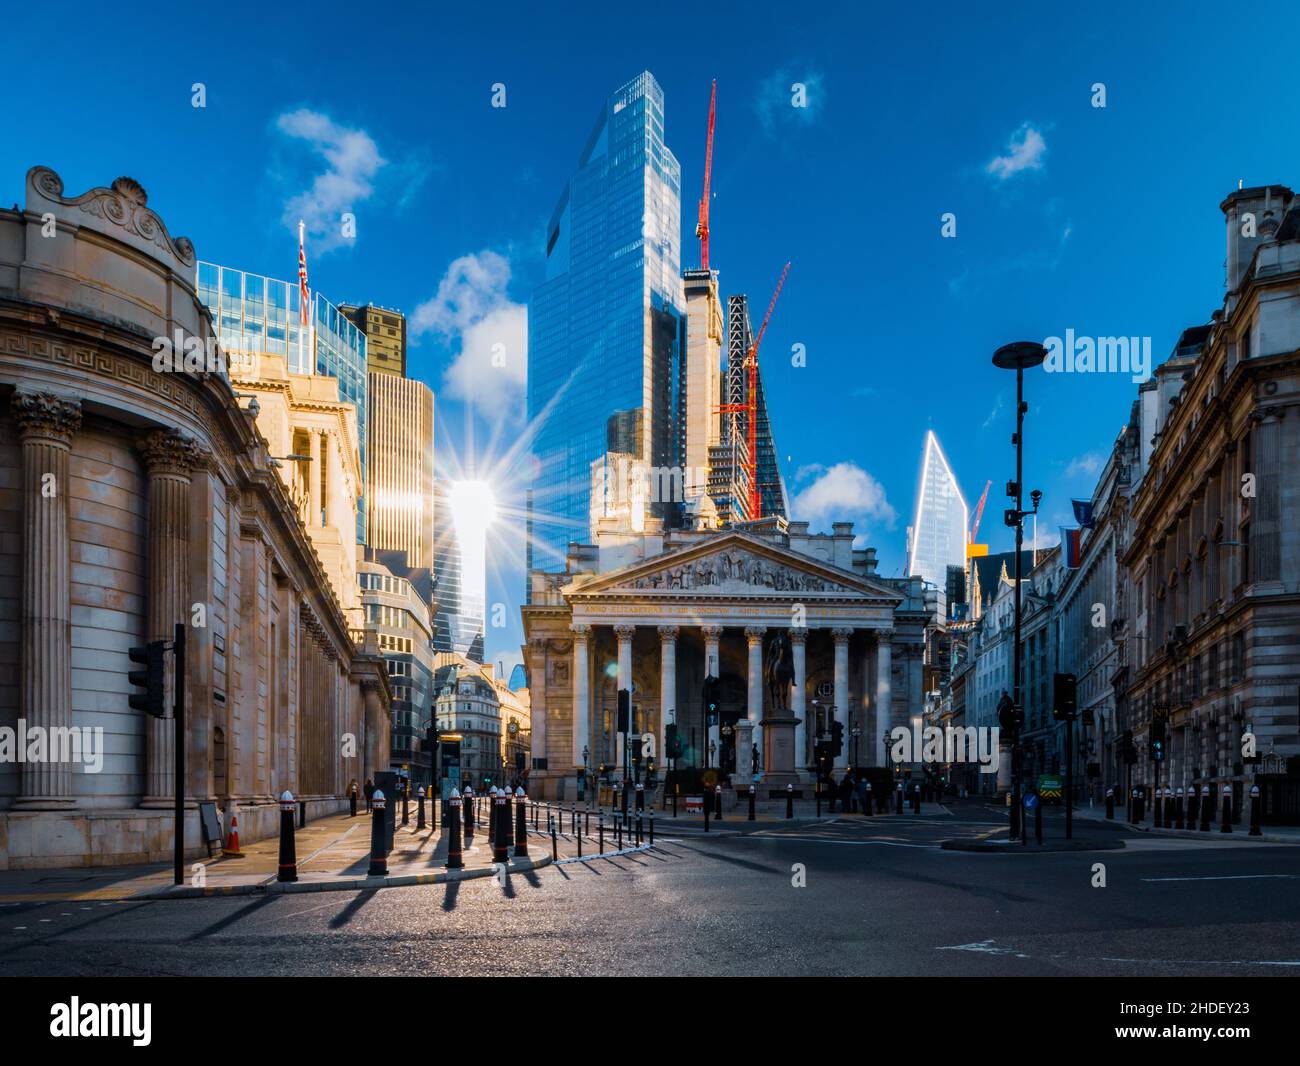 The Royal Exchange, city of London at Bank station Stock Photo